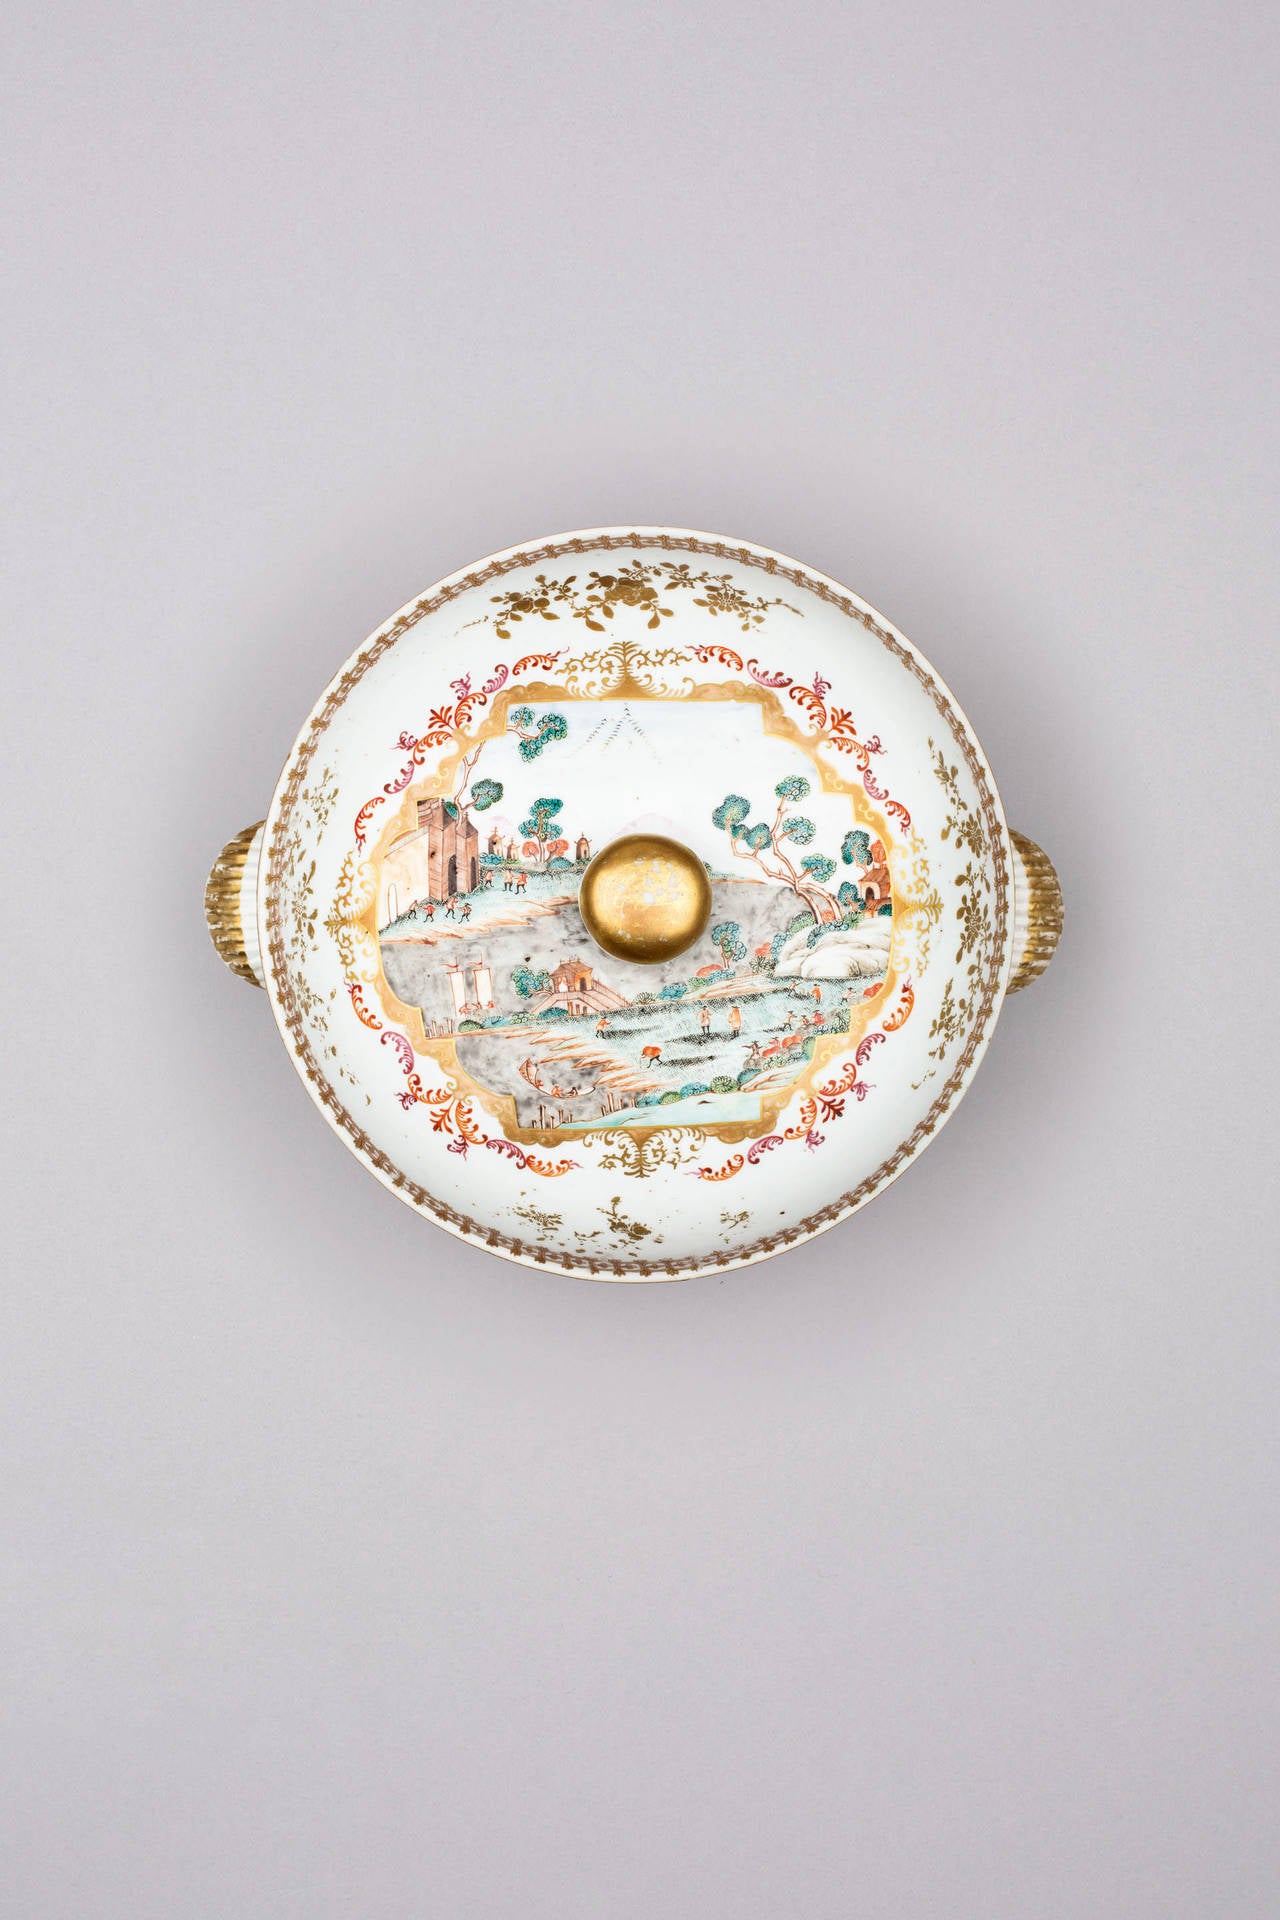 Qing Famille rose large circular tureen, cover and stand, after Meissen, 18th century